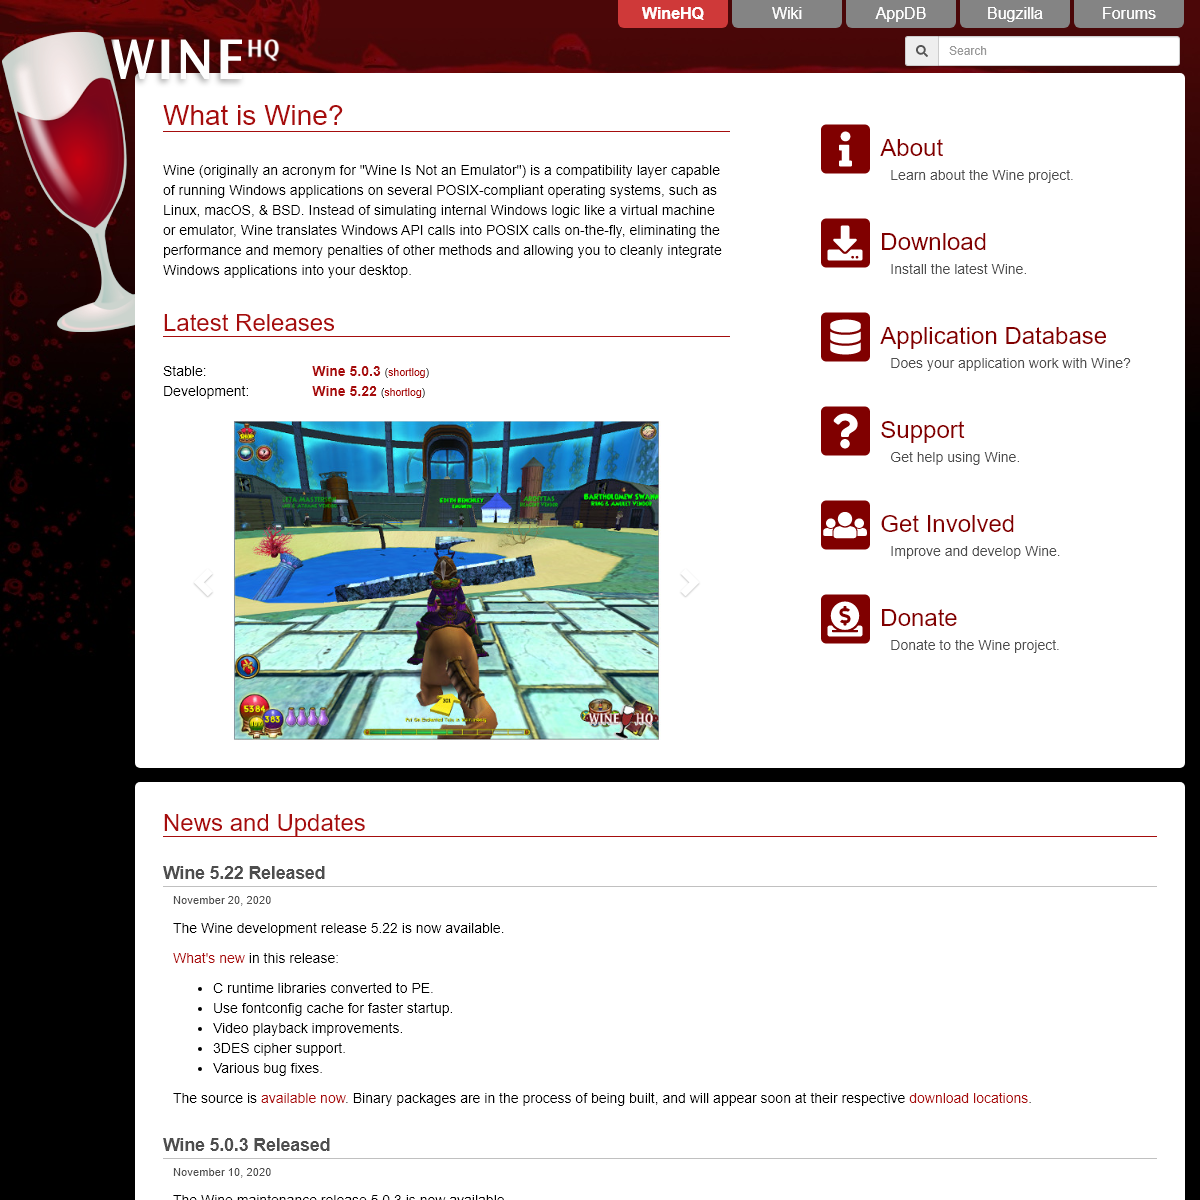 A complete backup of winehq.org